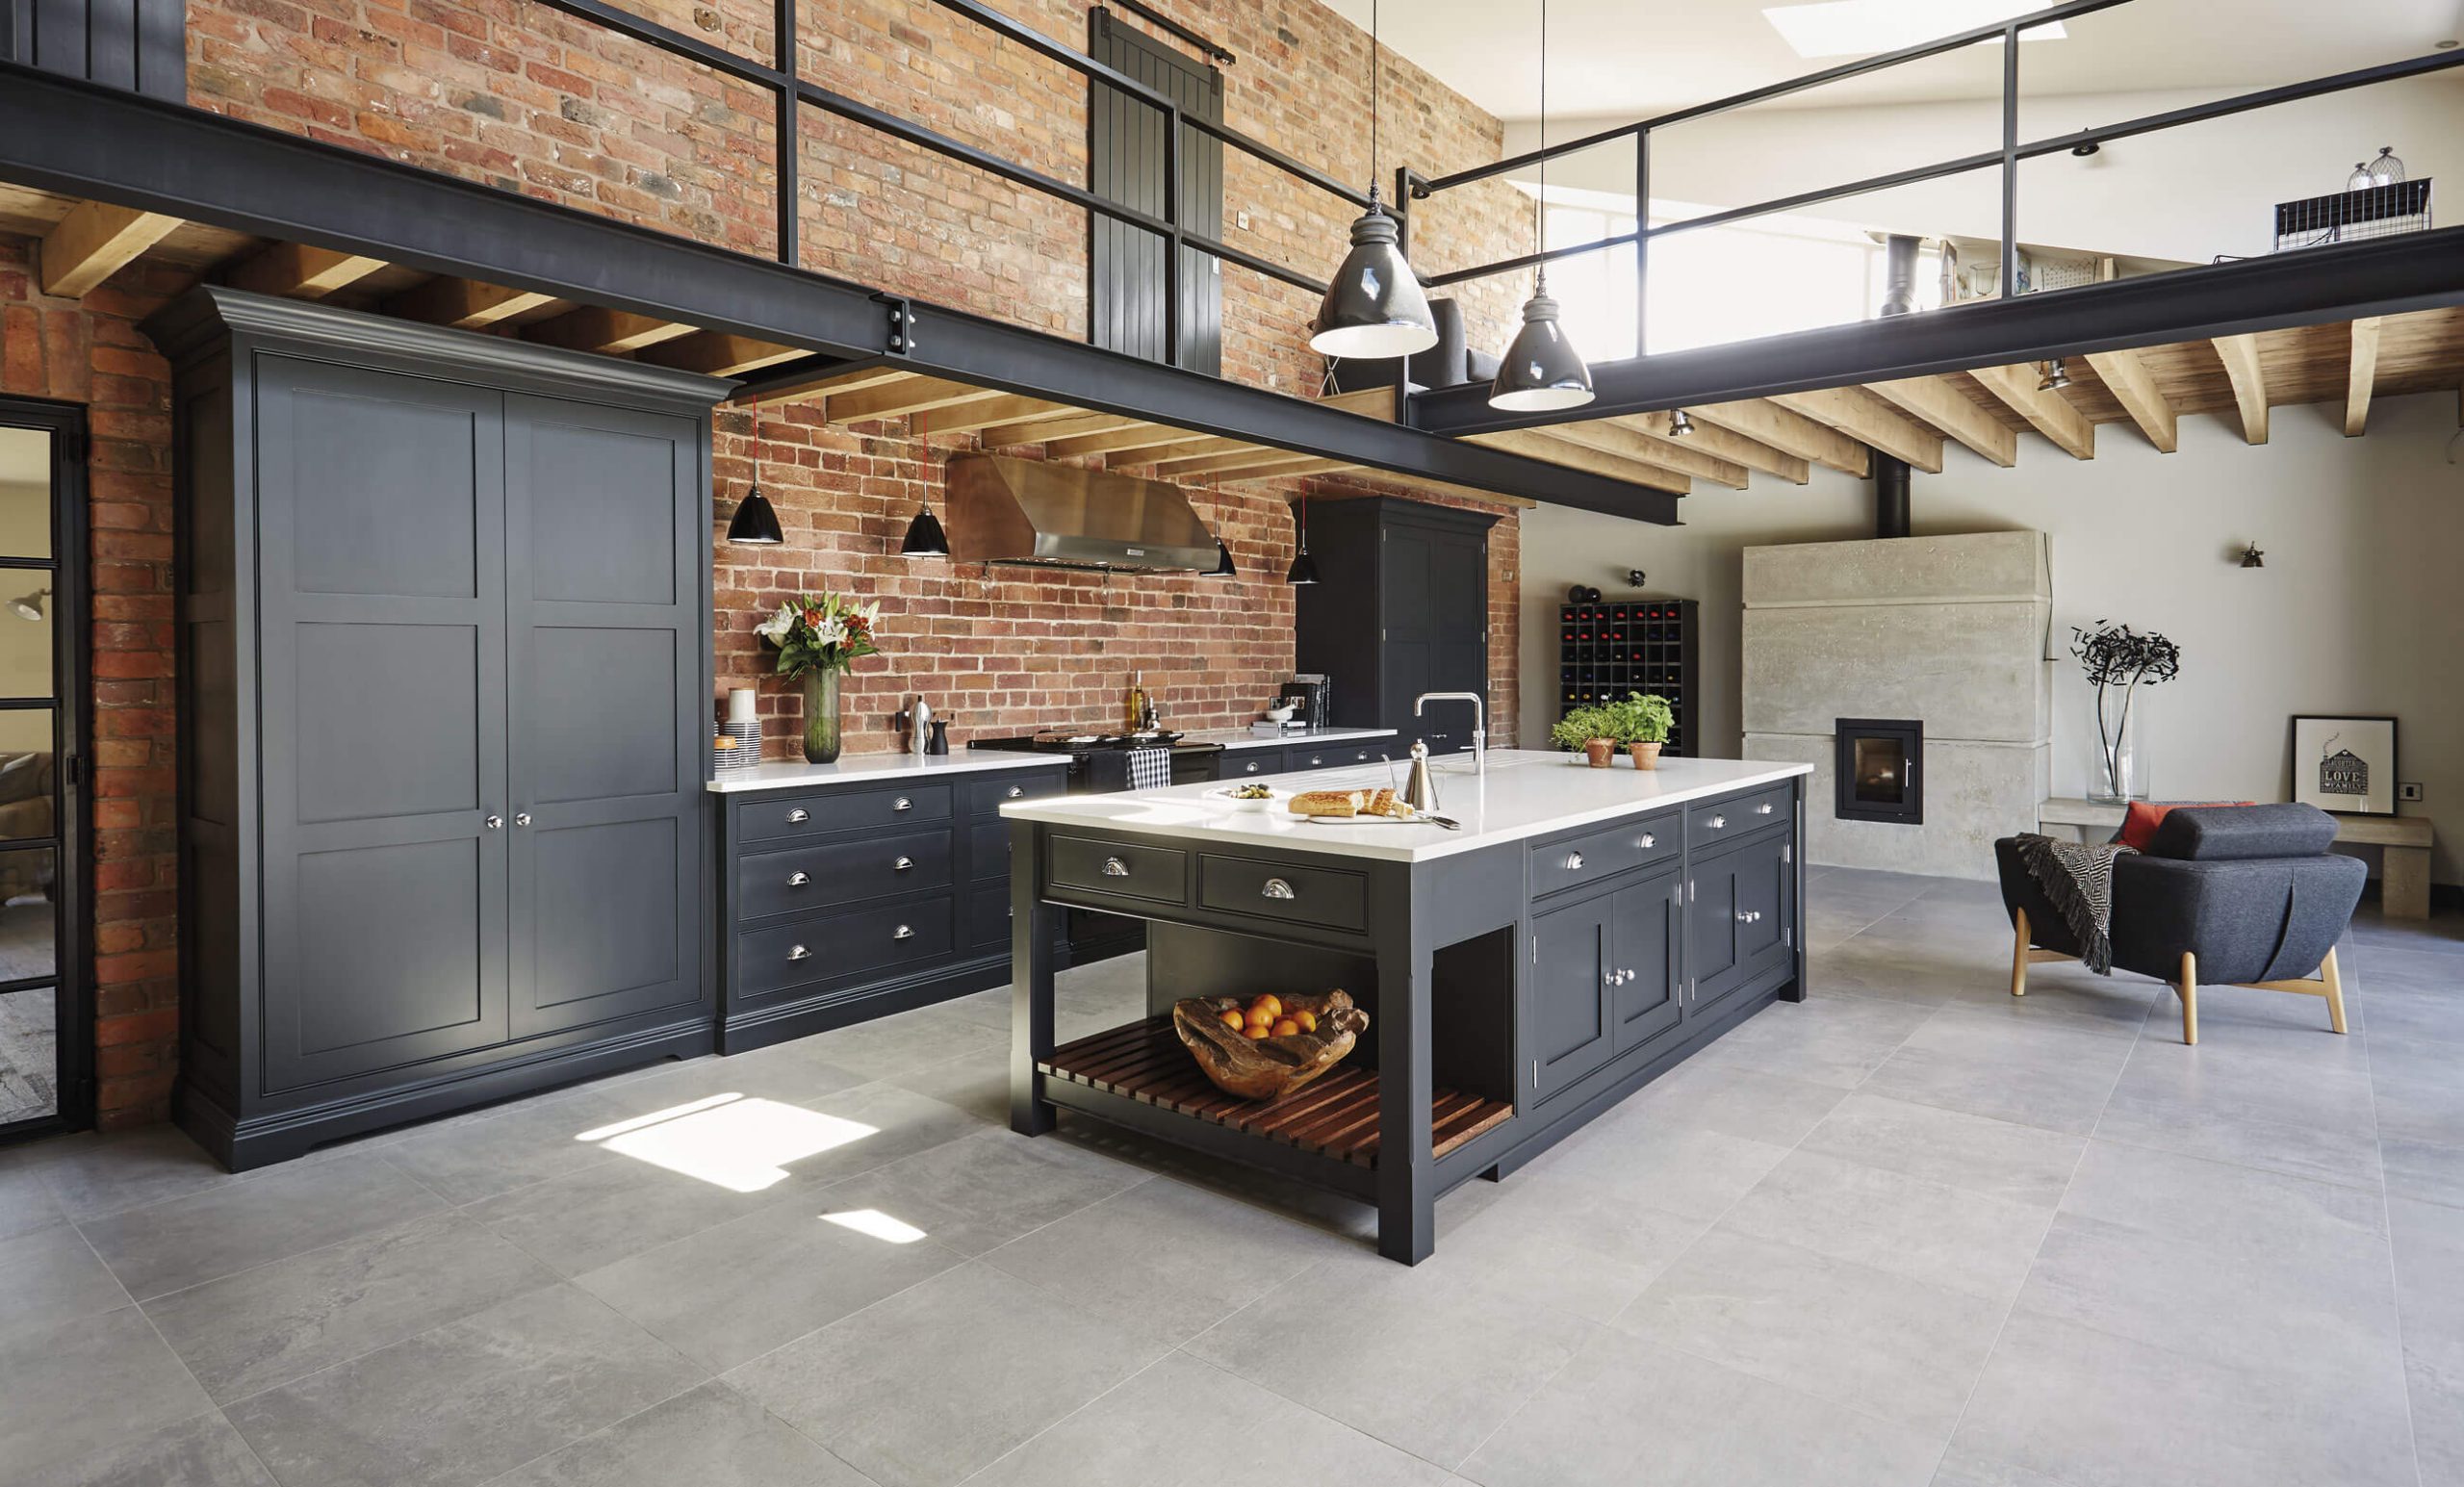 Tips for designing an industrial kitchen that is both stylish and efficient